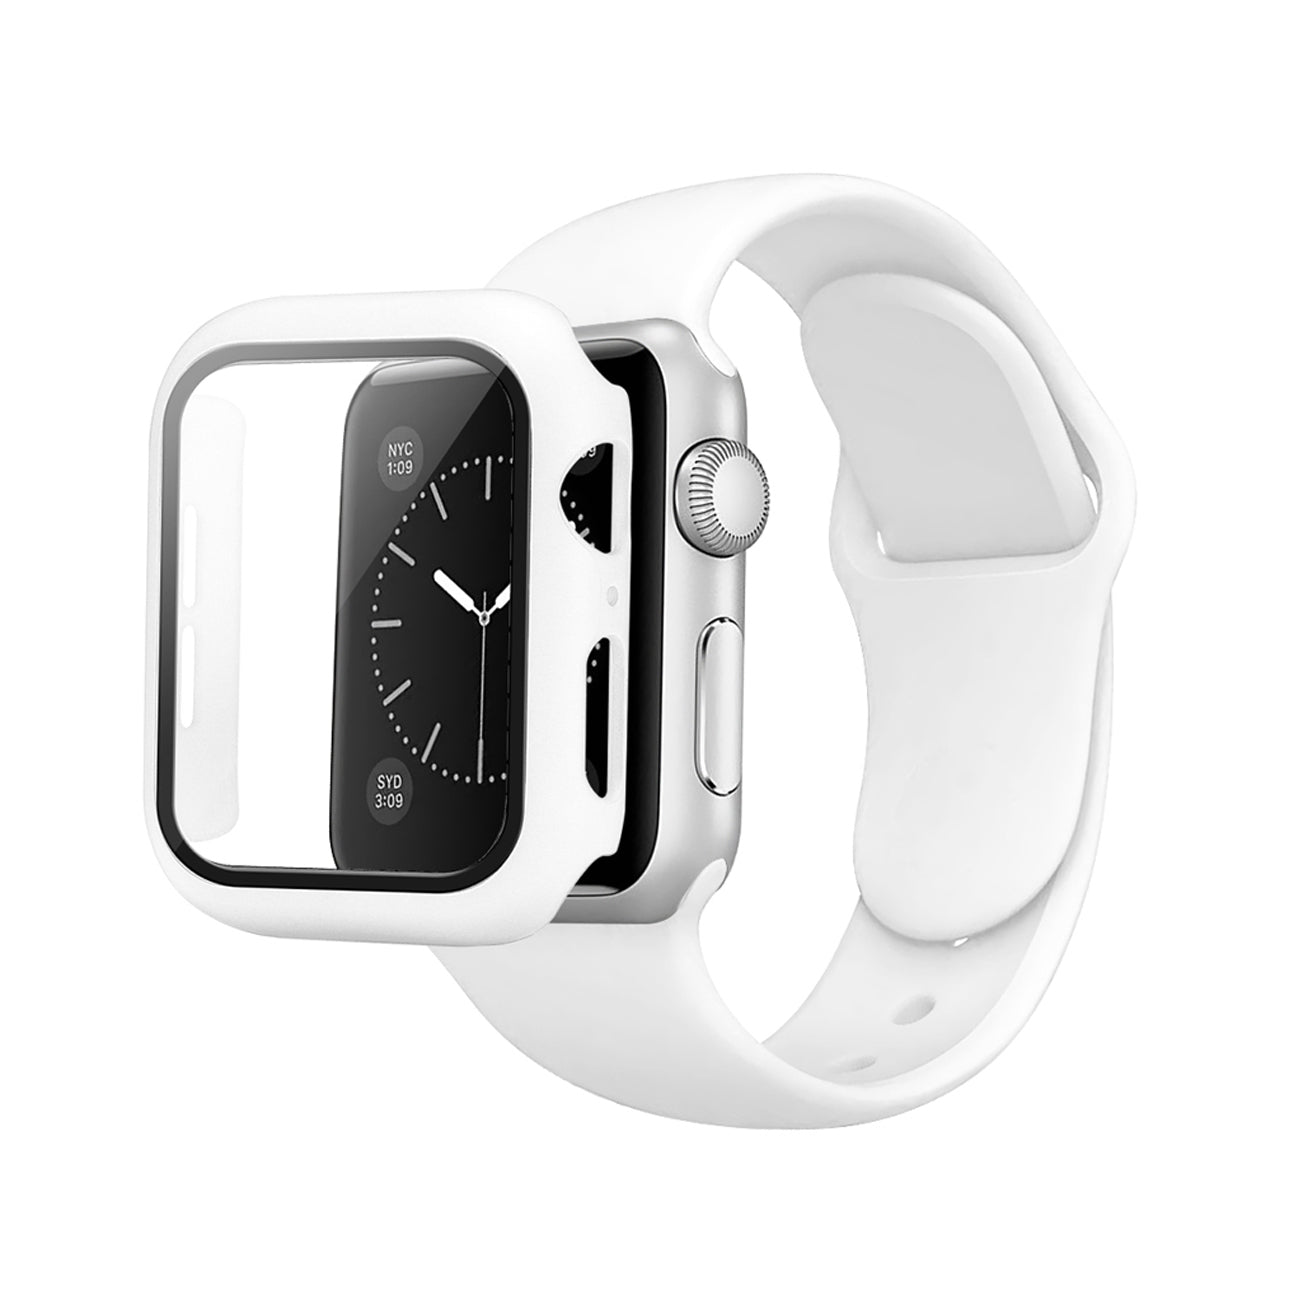 Watch Case PC With Glass Screen Protector, Silicone Watch Band Apple Watch 44mm White Color